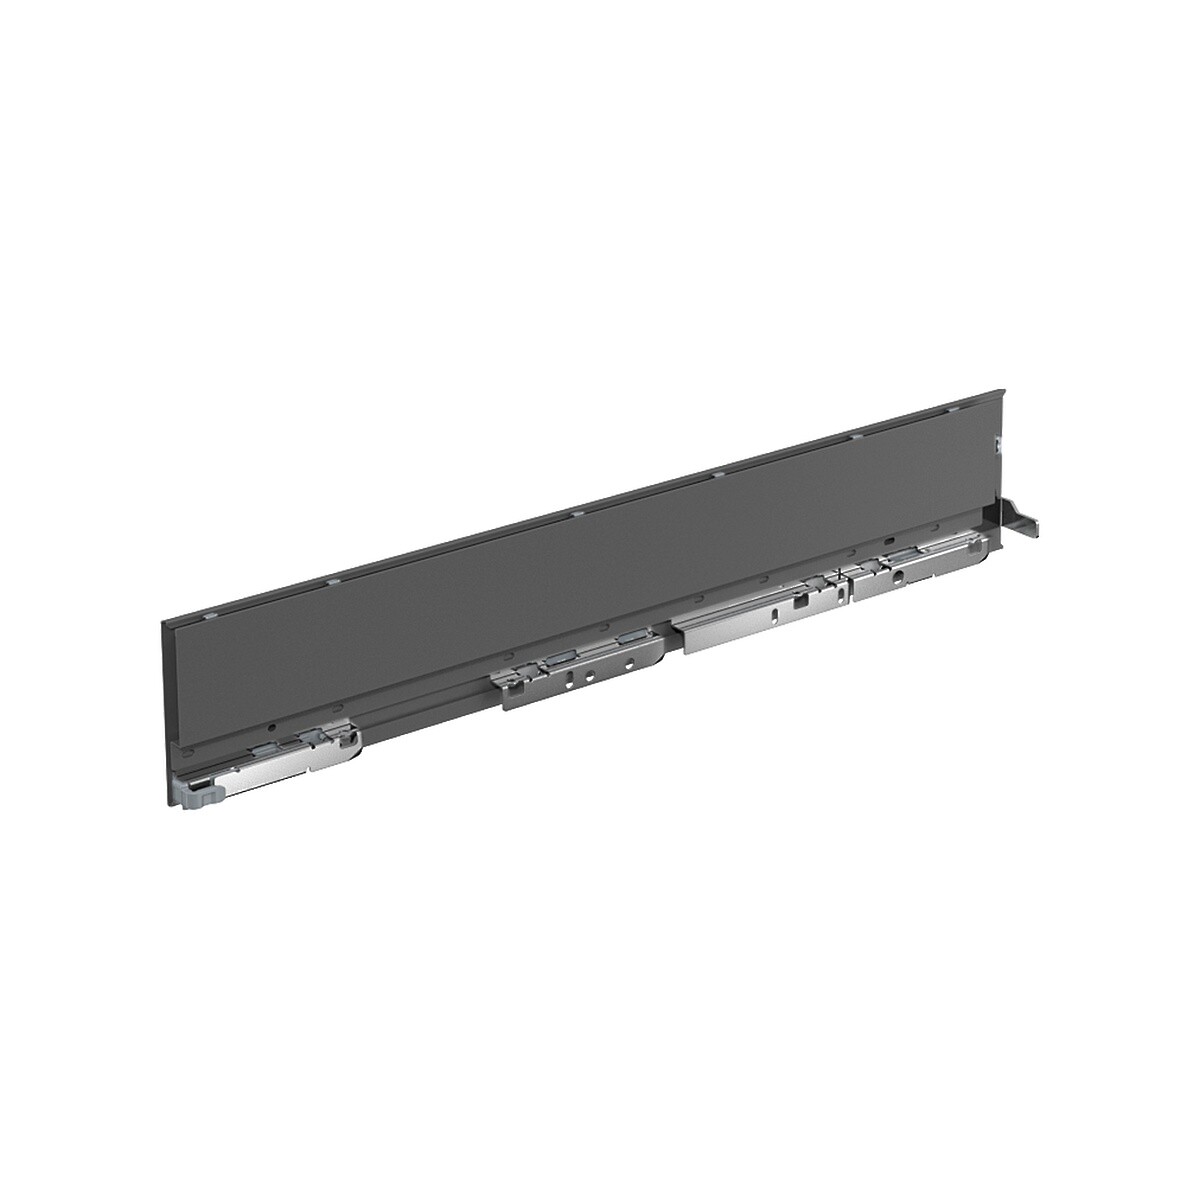 AvanTech YOU Drawer side profile, height 101 mm x NL 350 mm, Anthracite, Left